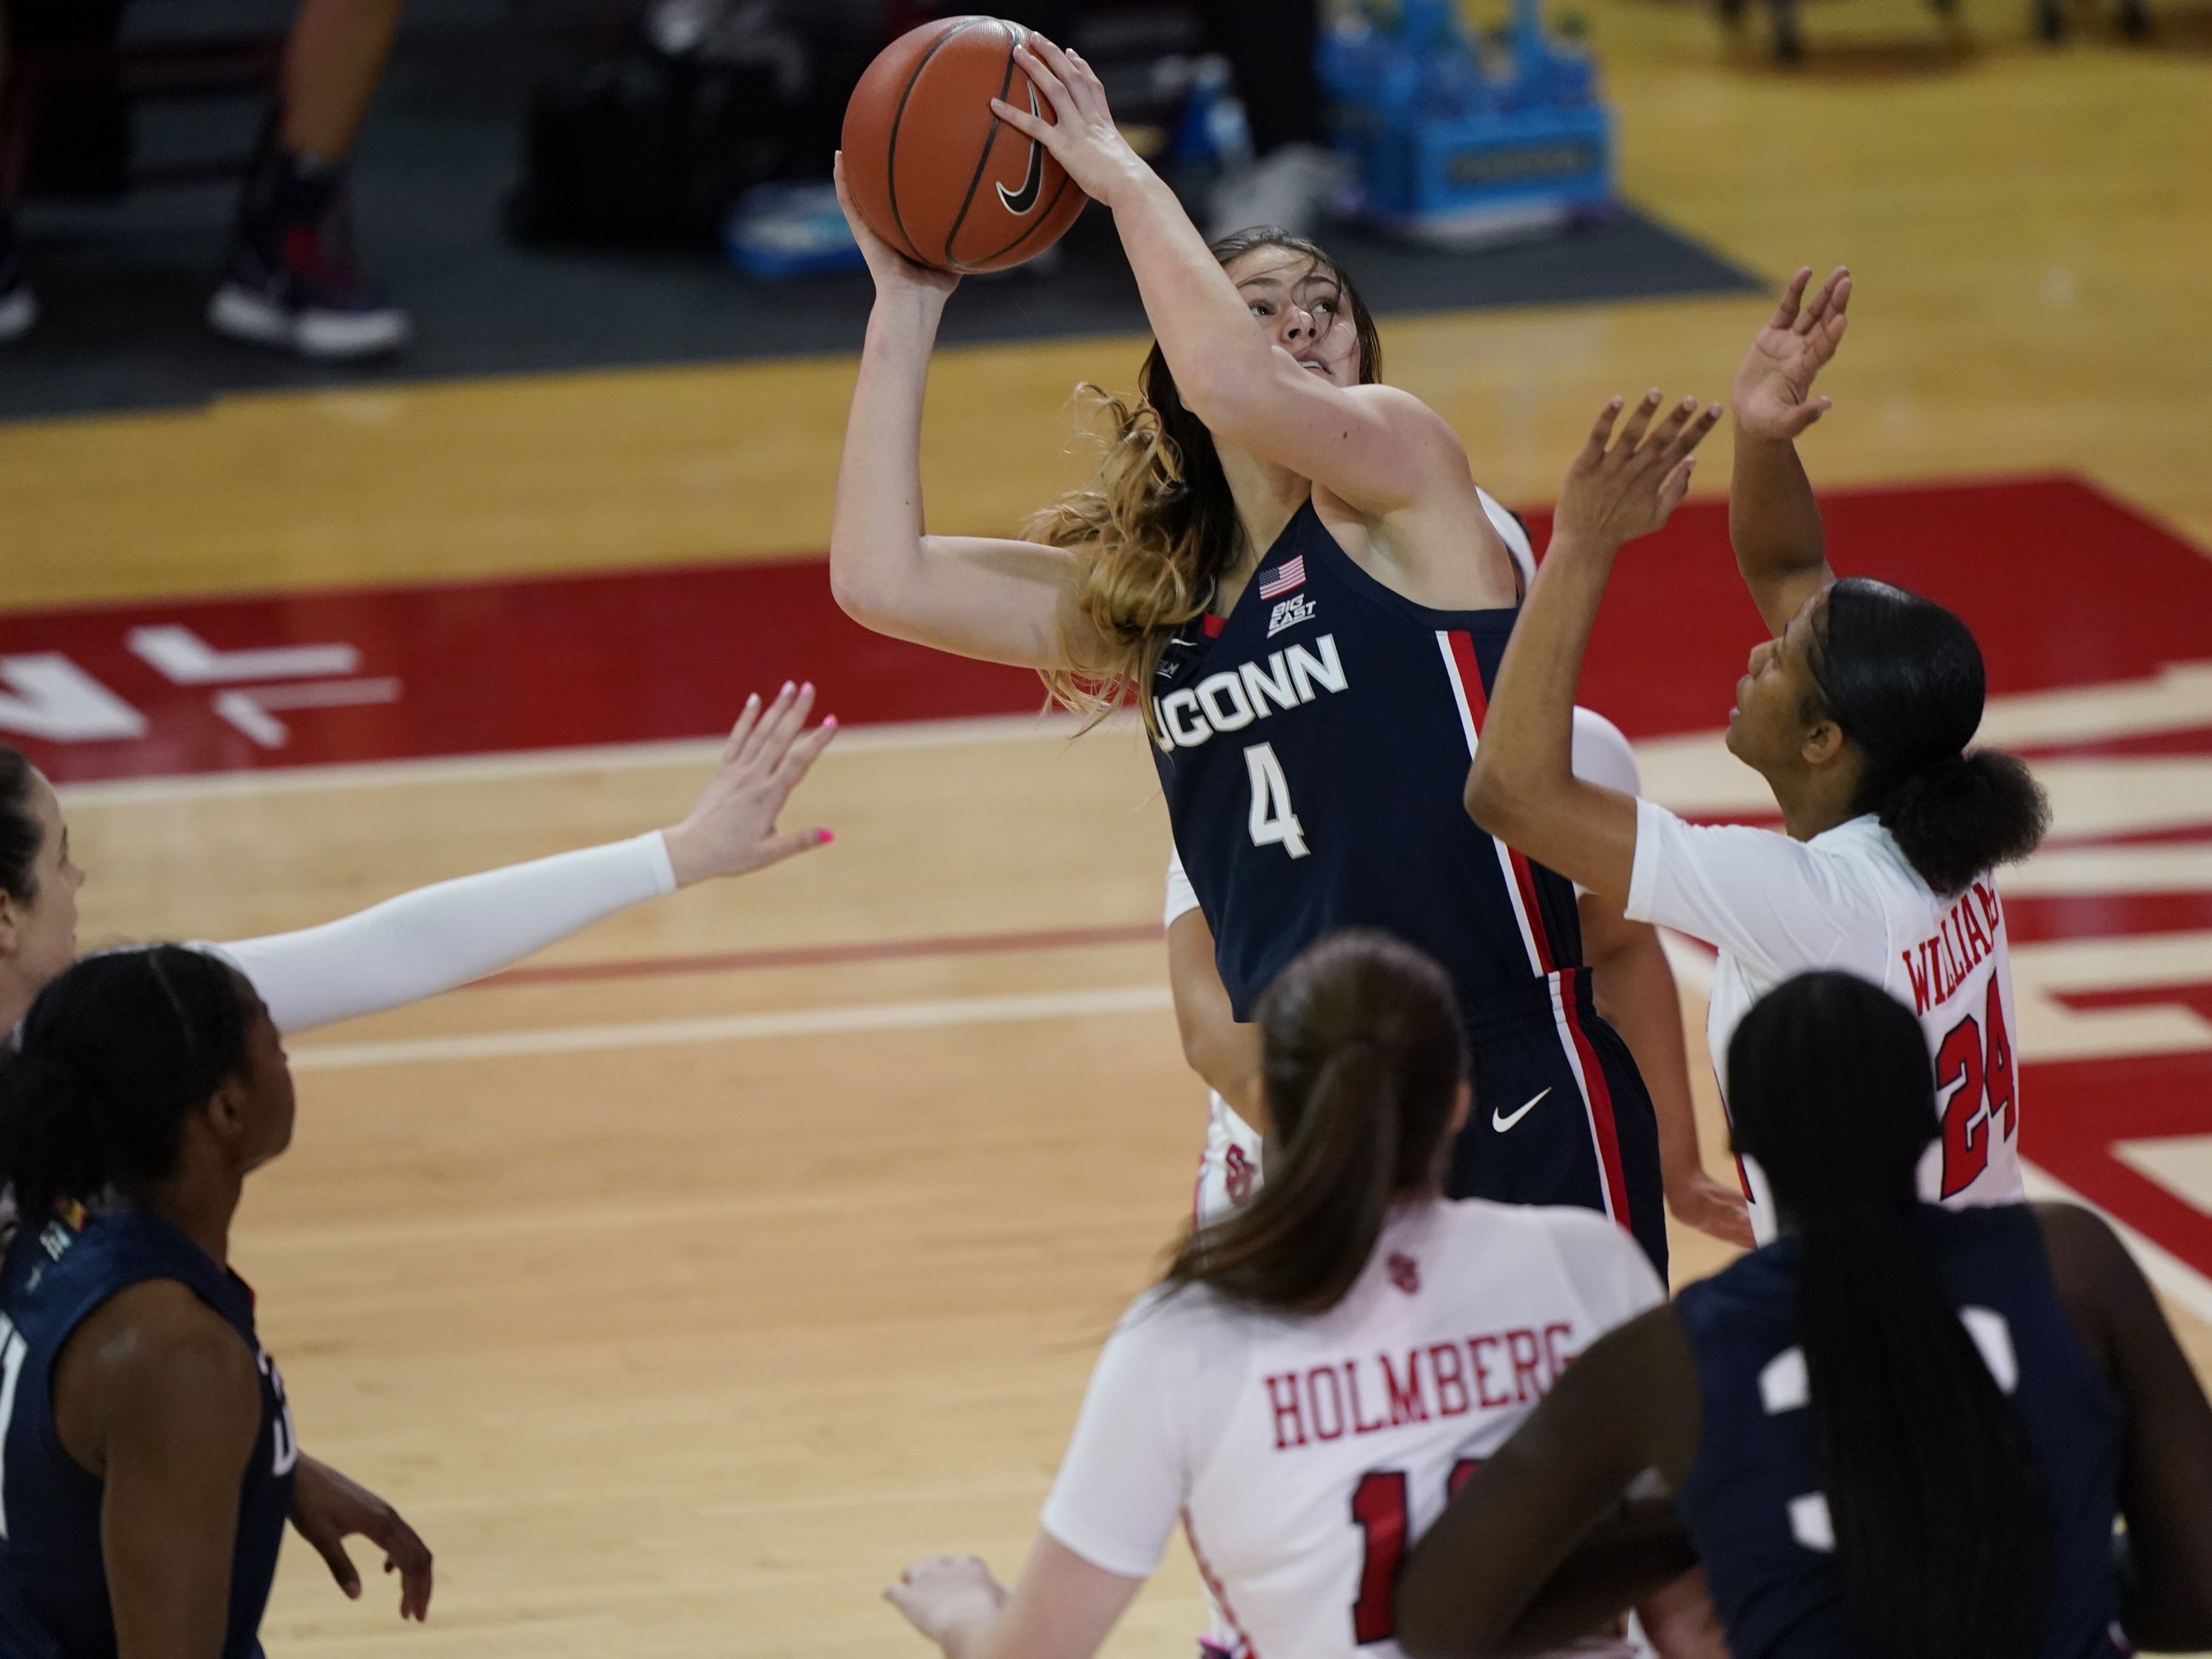 Connecticut guard Saylor Poffenbarger (4) is defended by St. John's guard Danaijah Williams (24) and forward Cecilia Holmberg (11) during the fourth quarter of an NCAA college basketball game in New York last month. The women's NCAA championship begins Sunday. CREDIT: Kathy Willens/AP